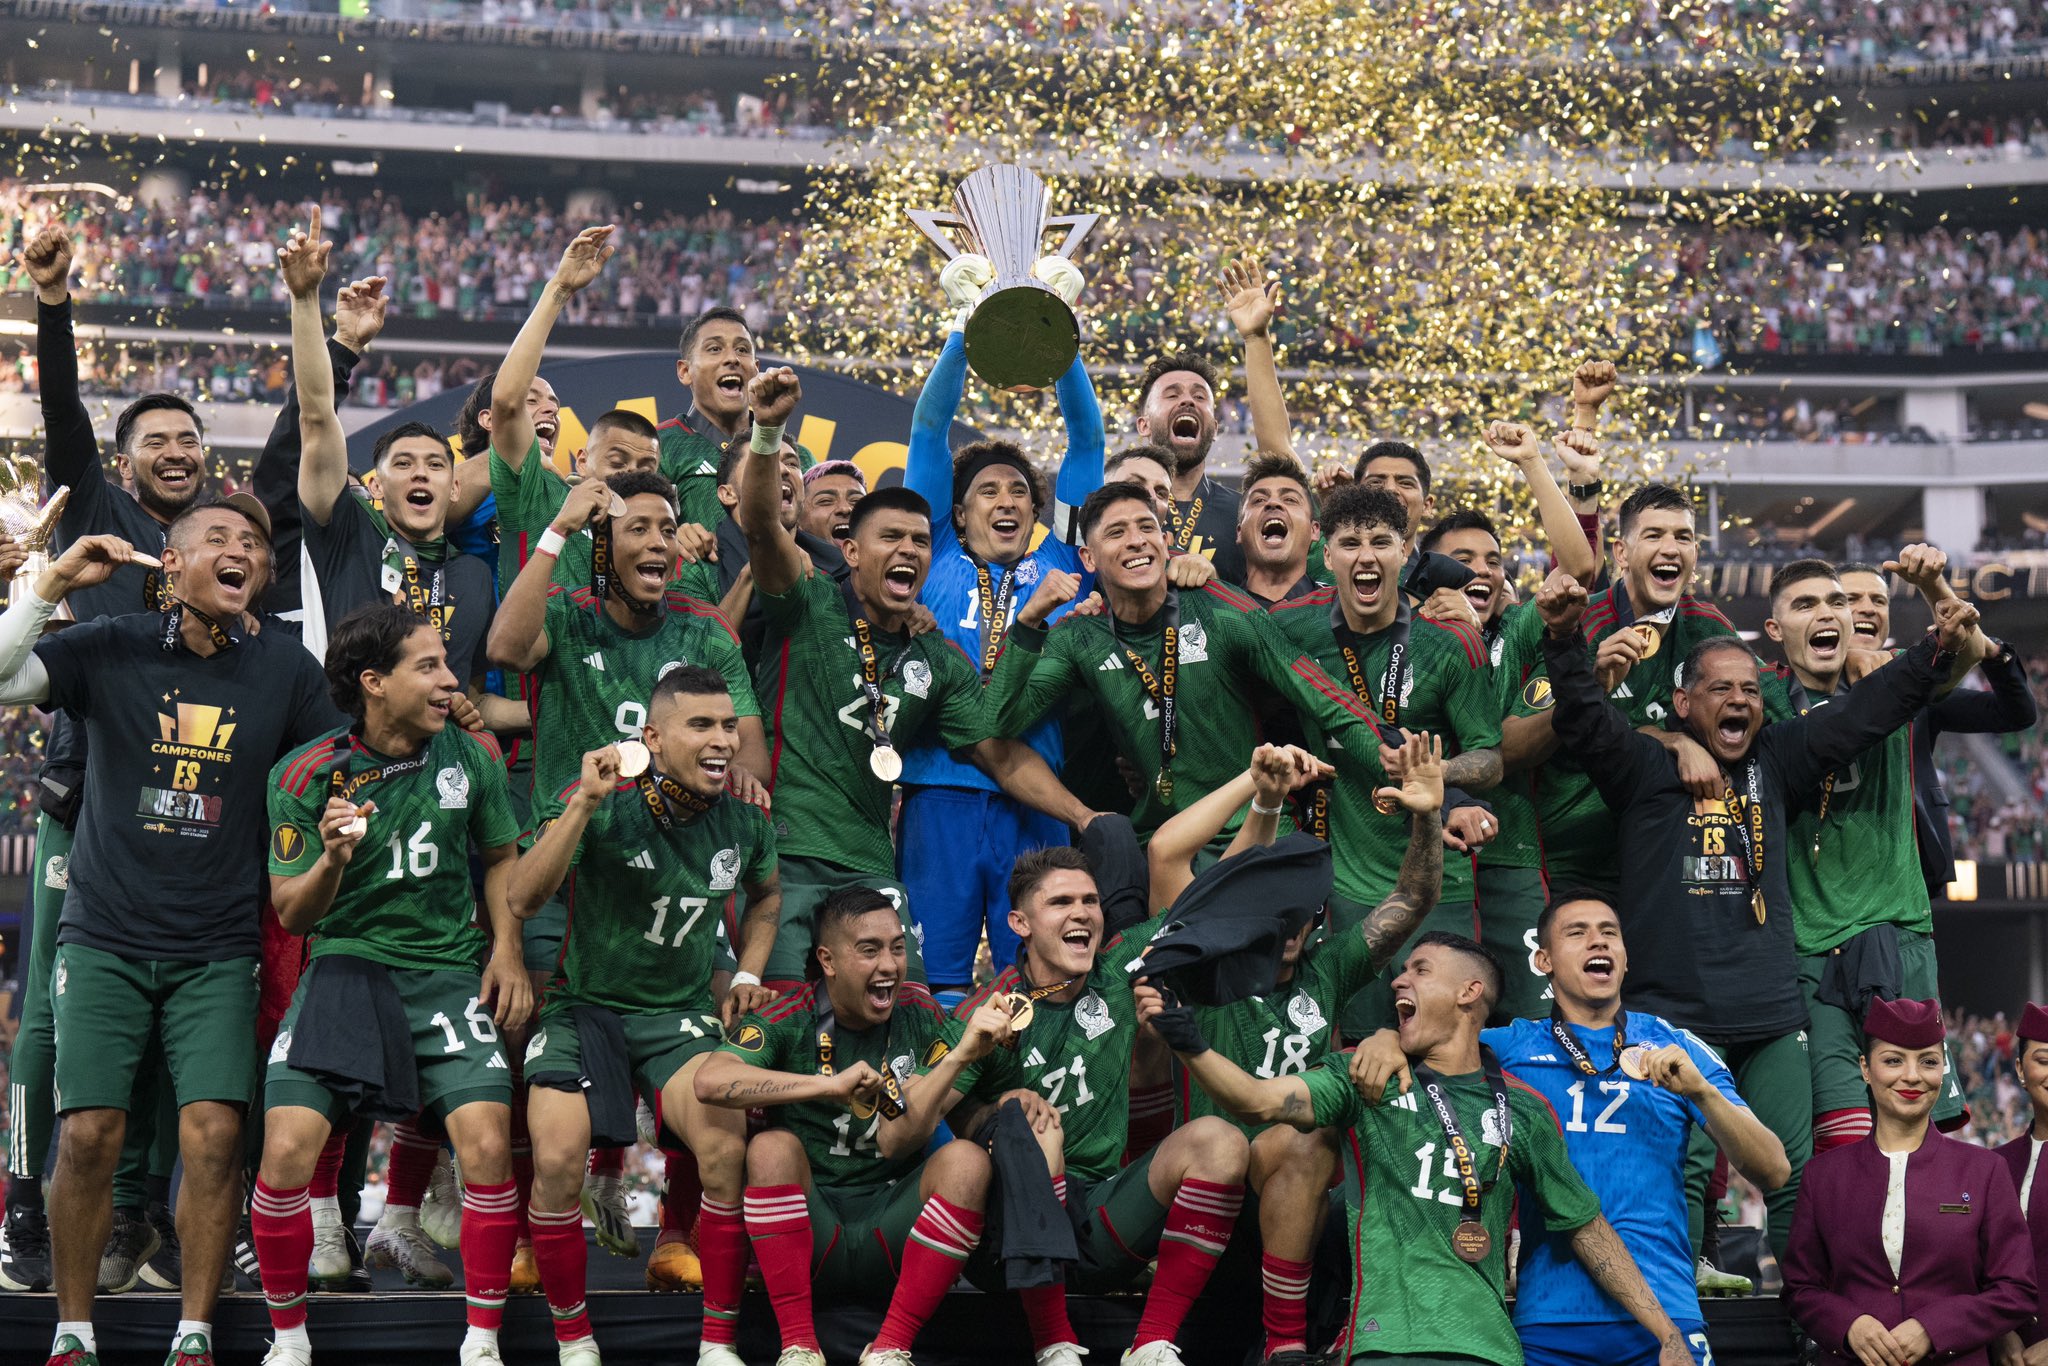 Mexican National Team on X: 🏆 @GutiGalaviz & @psveindhoven are the 2023 KNVB  Beker Champions! Congratulations all the way to 🇳🇱. #LaSelecciónEsDeTodos   / X